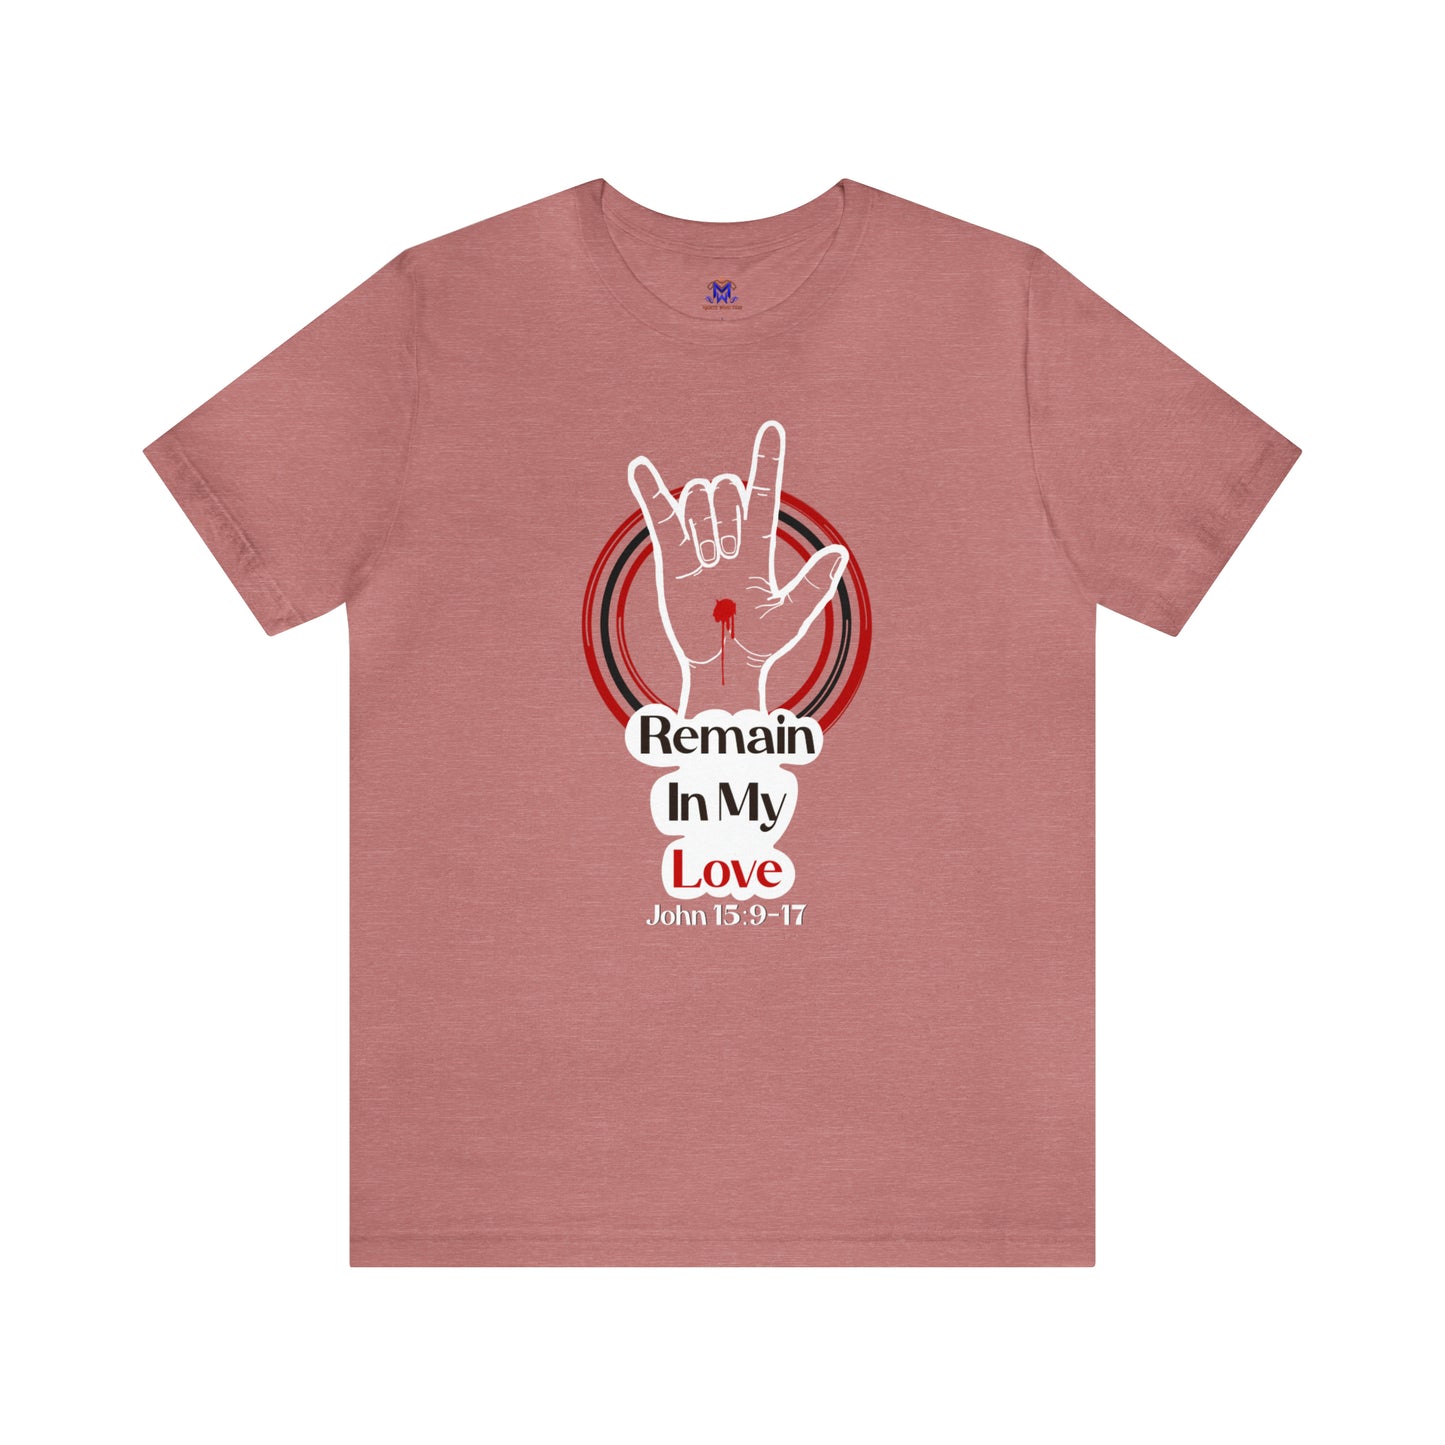 Remain In My Love (Available in more colors)